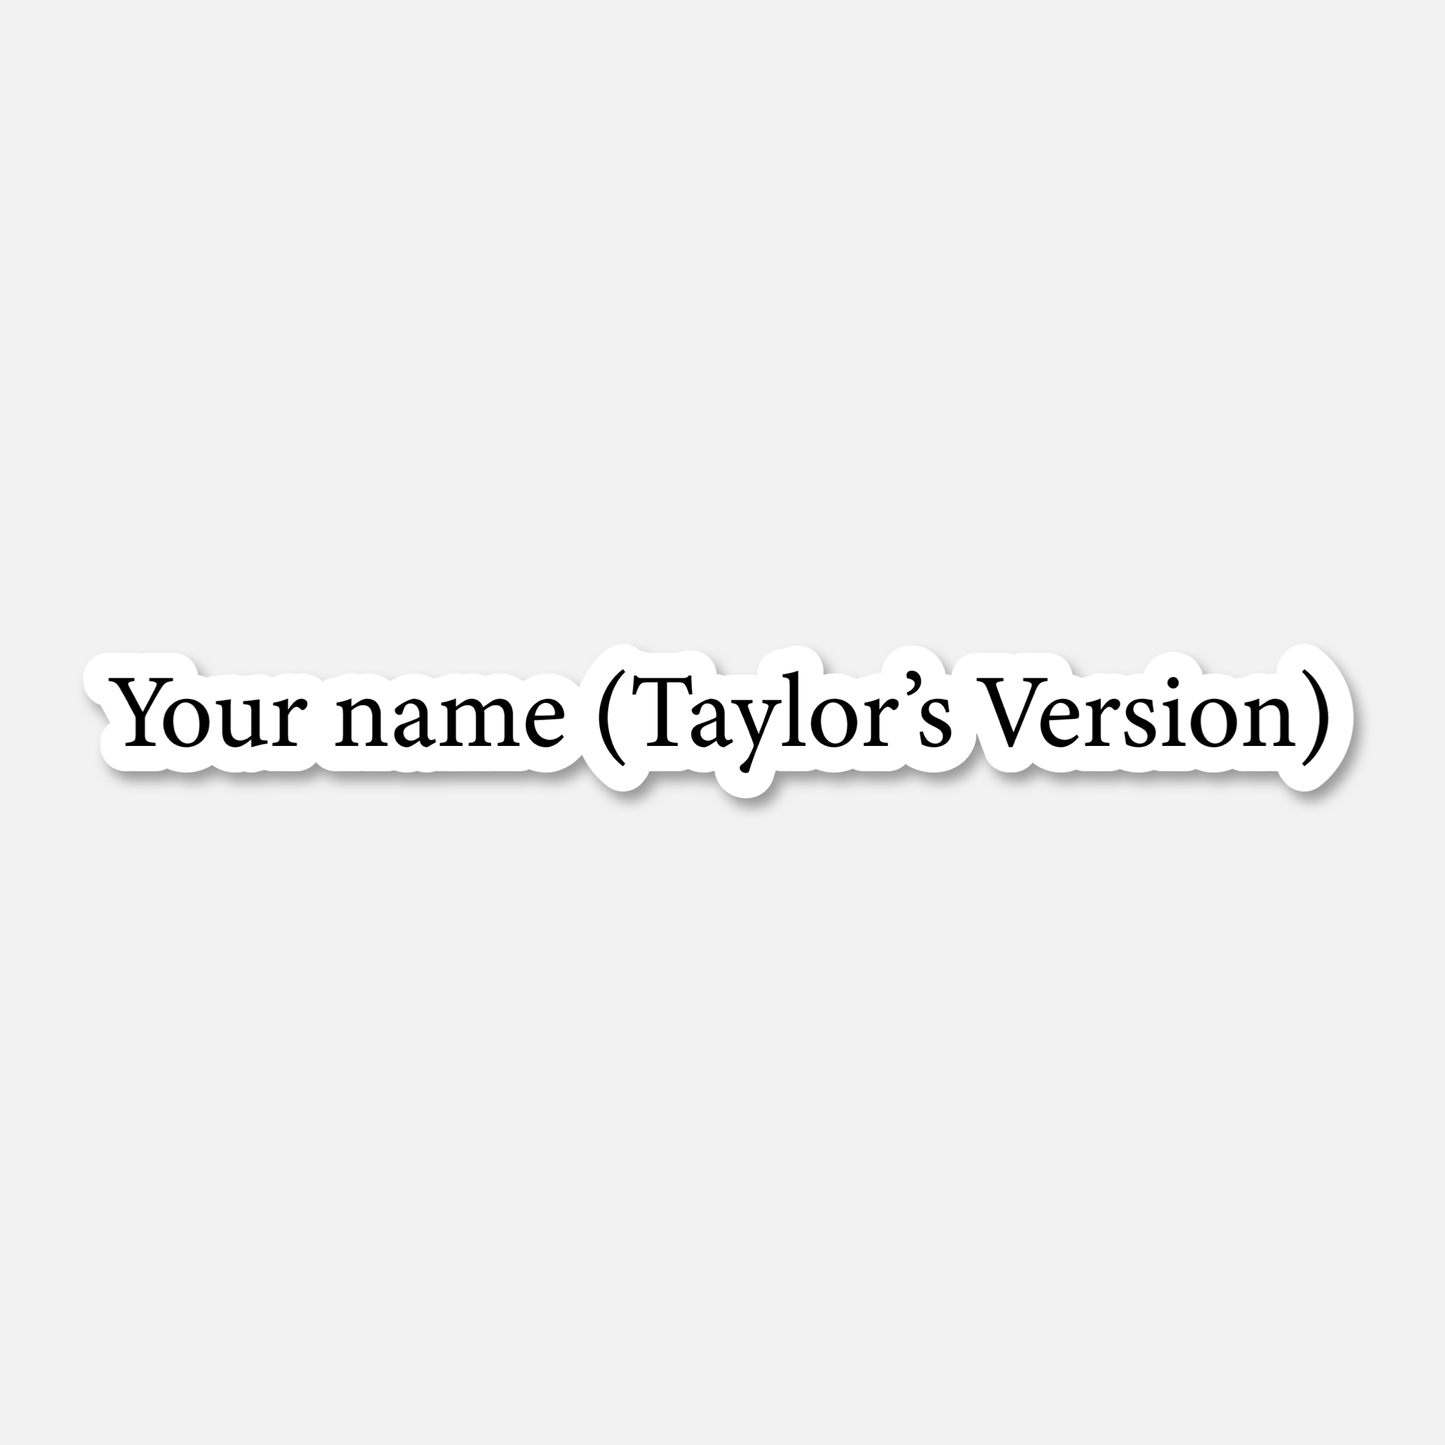 Your name (Taylor's Version)  - Sticker